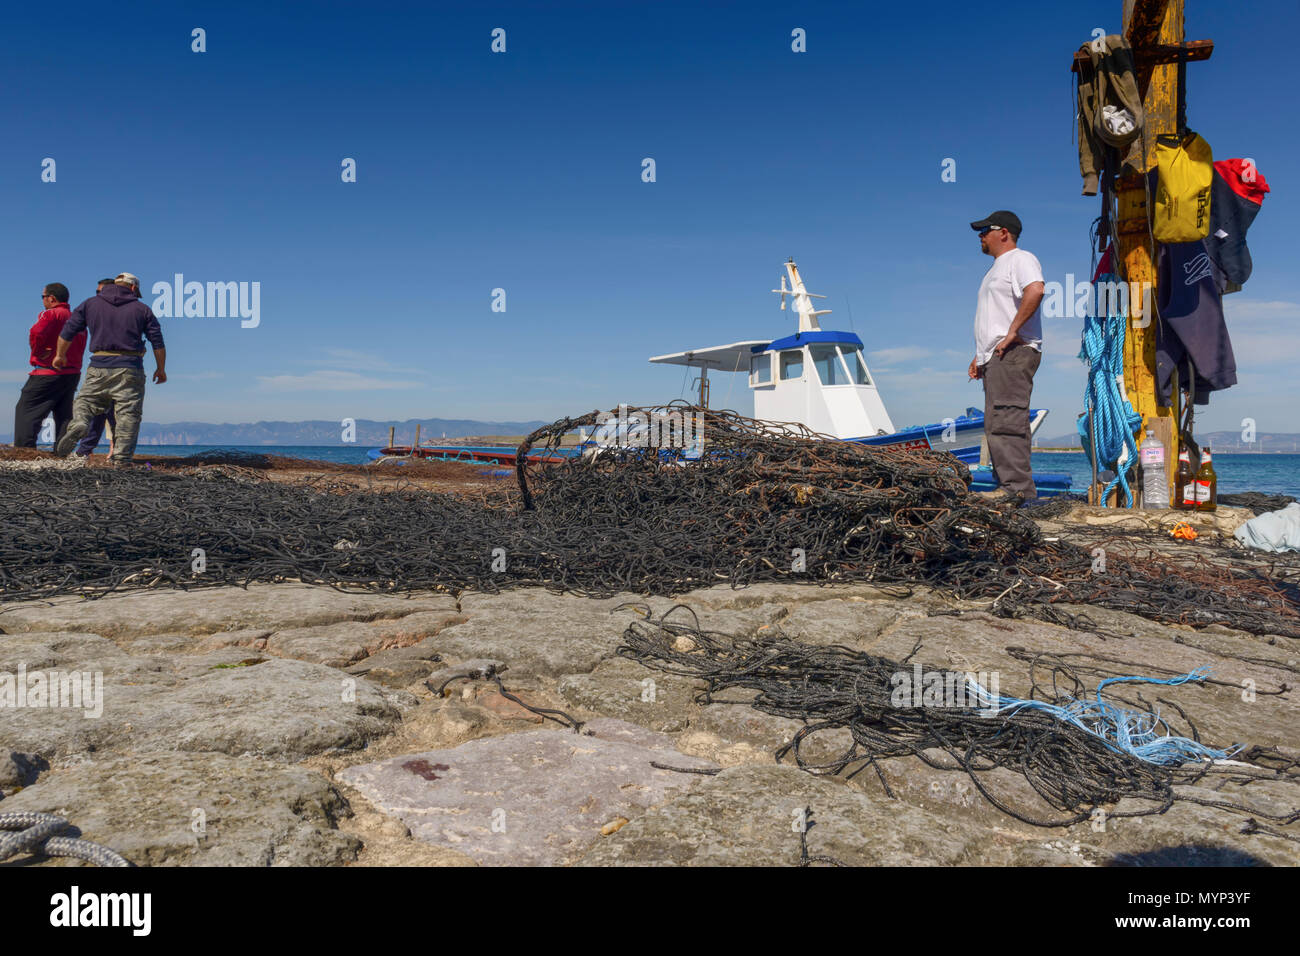 Carloforte, Island of San Pietro, Italy - 08 May 2014: 'Mattanza' is an ancient fishing technique based on nets. In Sardinia (southern Italy) there we Stock Photo